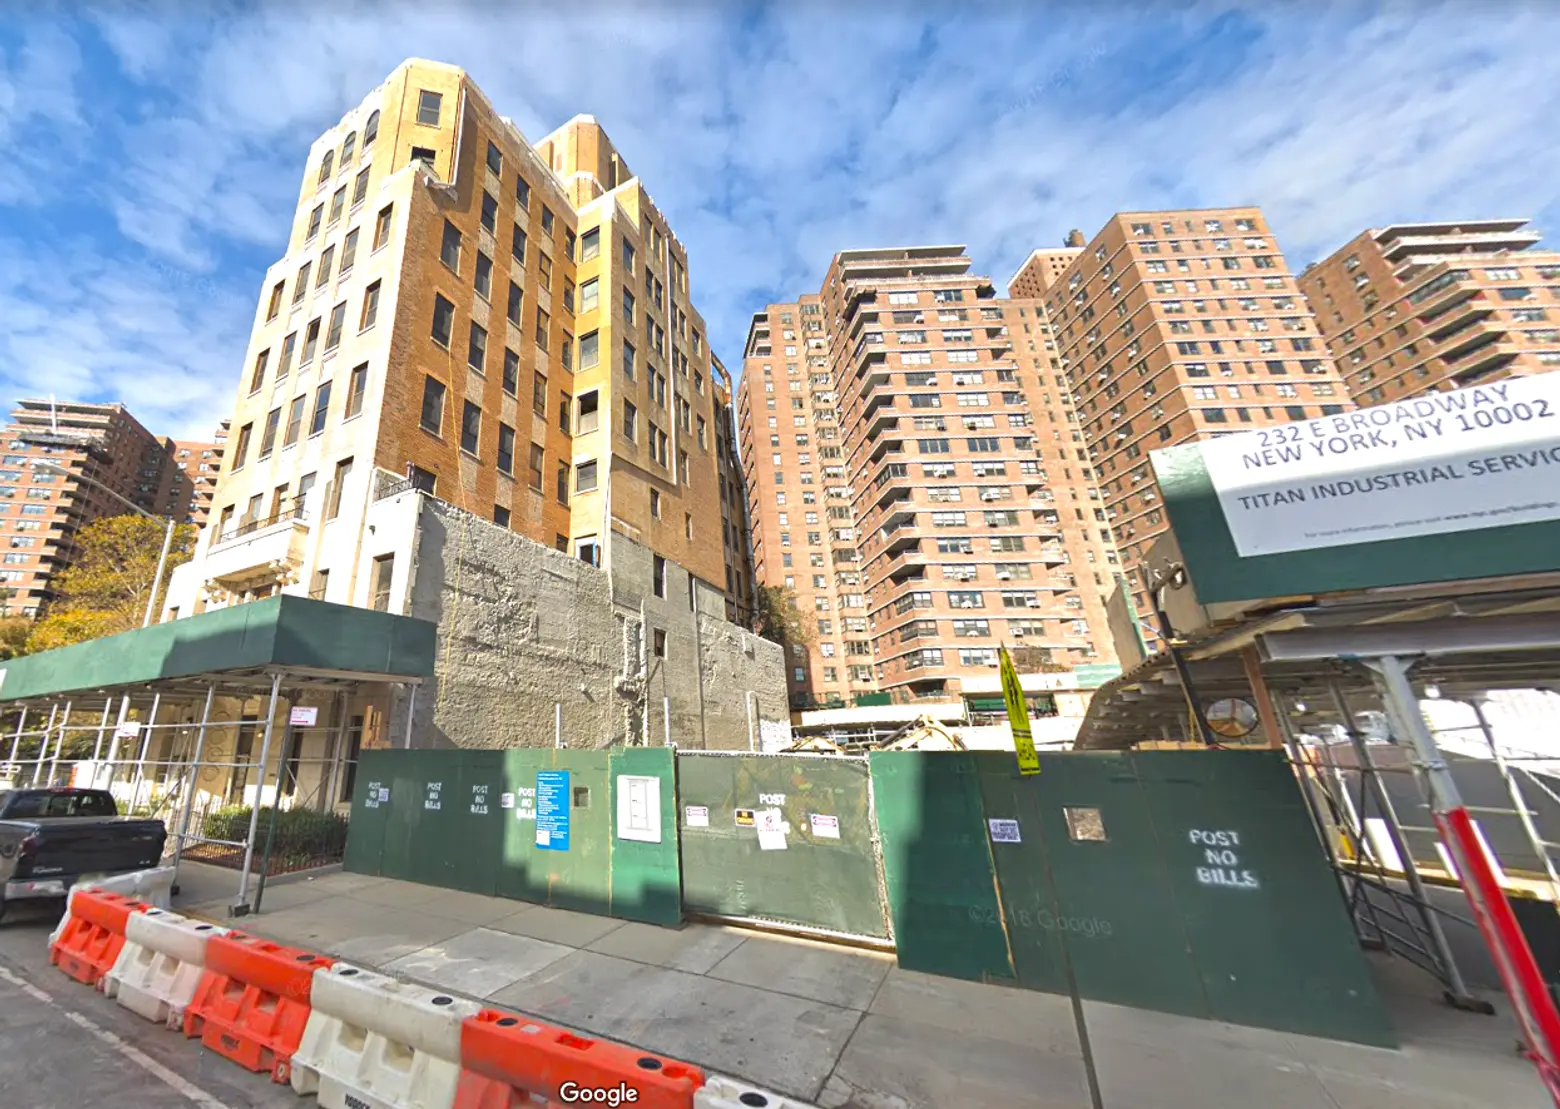 Permits filed for 30-story ‘affordable luxury’ condo tower on the Lower East Side